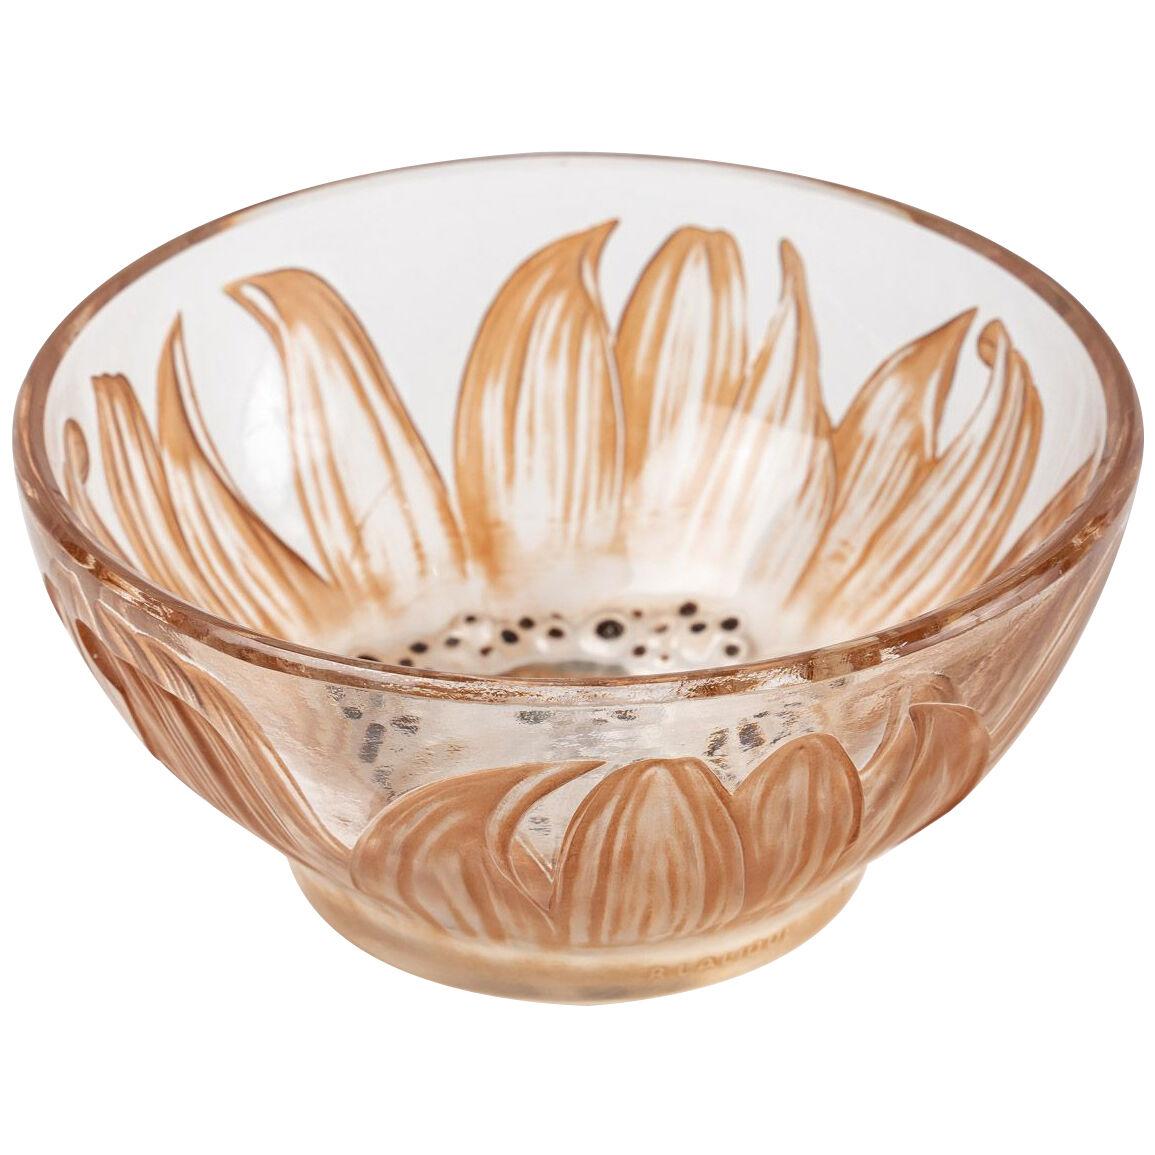 1912 Rene Lalique - Bowl Fleur Glass With Sepia Patina And Black Enamel